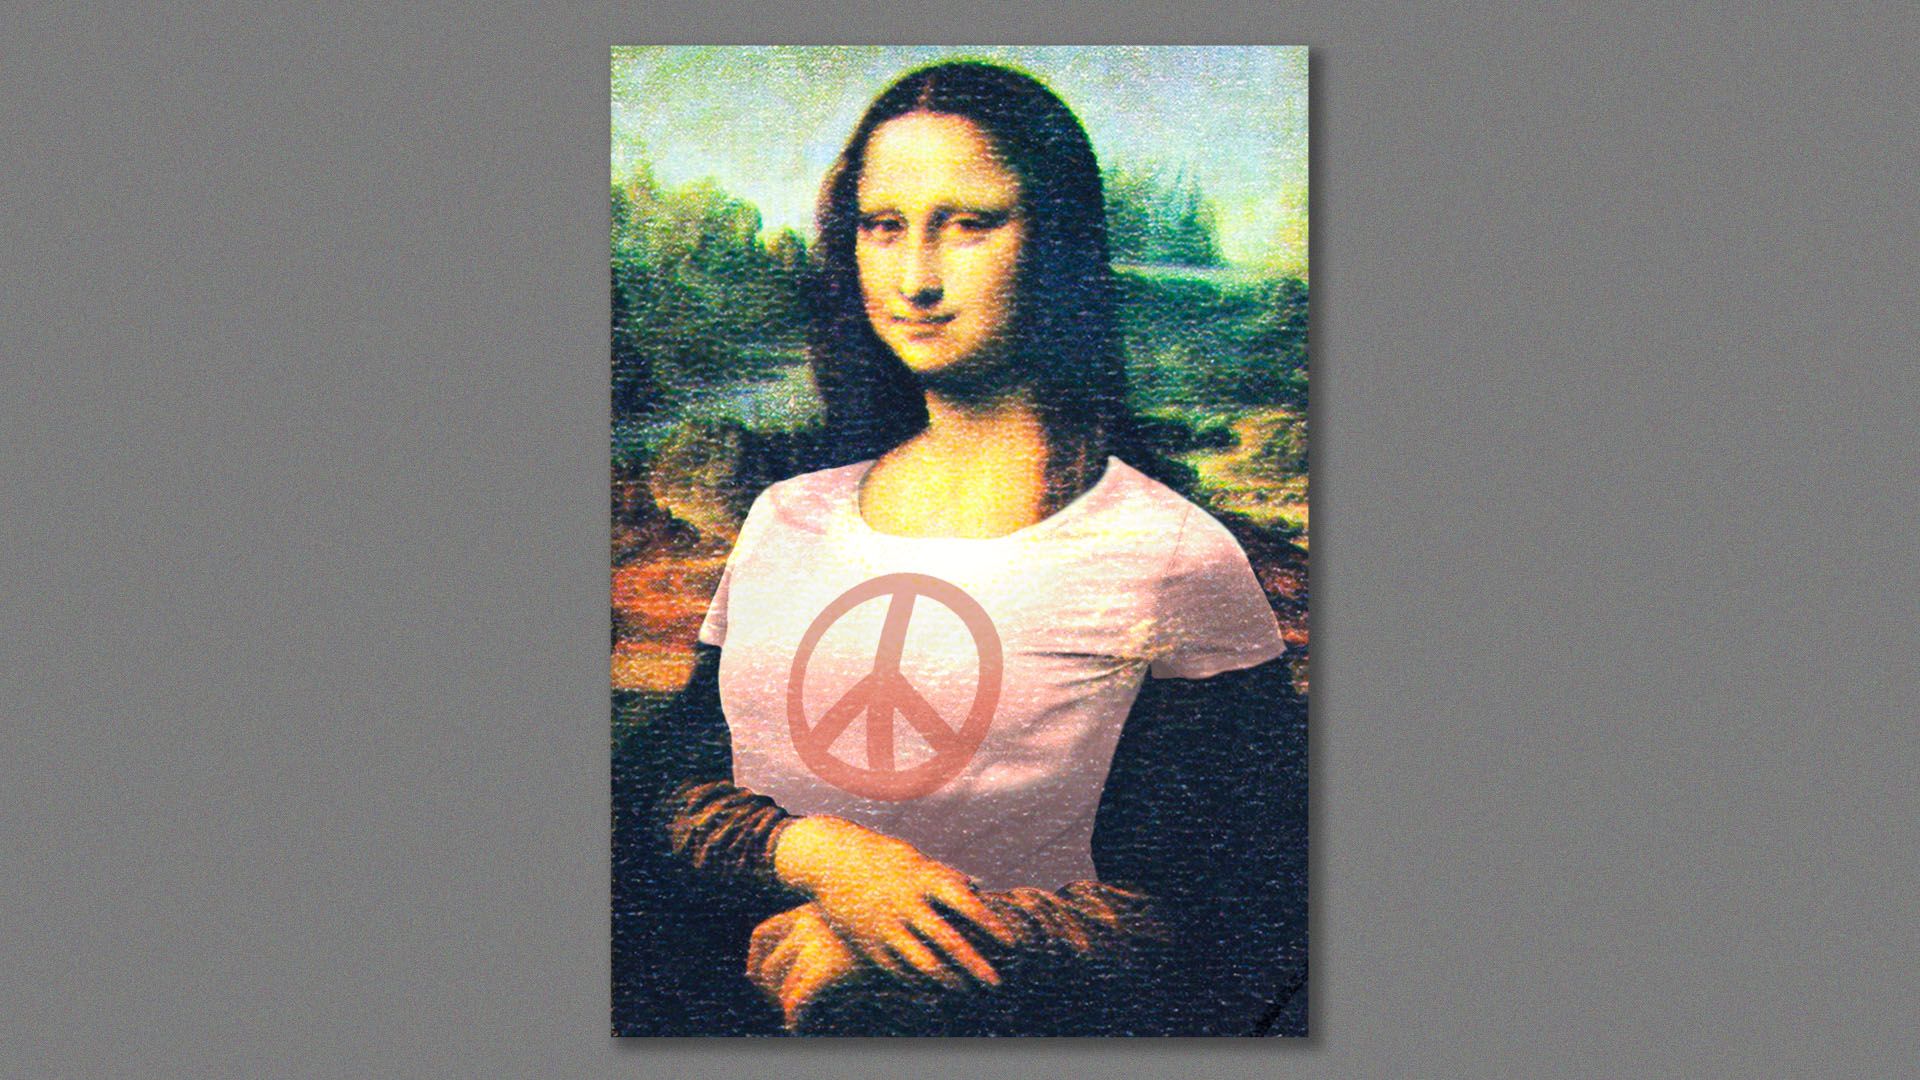 Illustration of the Mona Lisa wearing a t-shirt with a peace sign